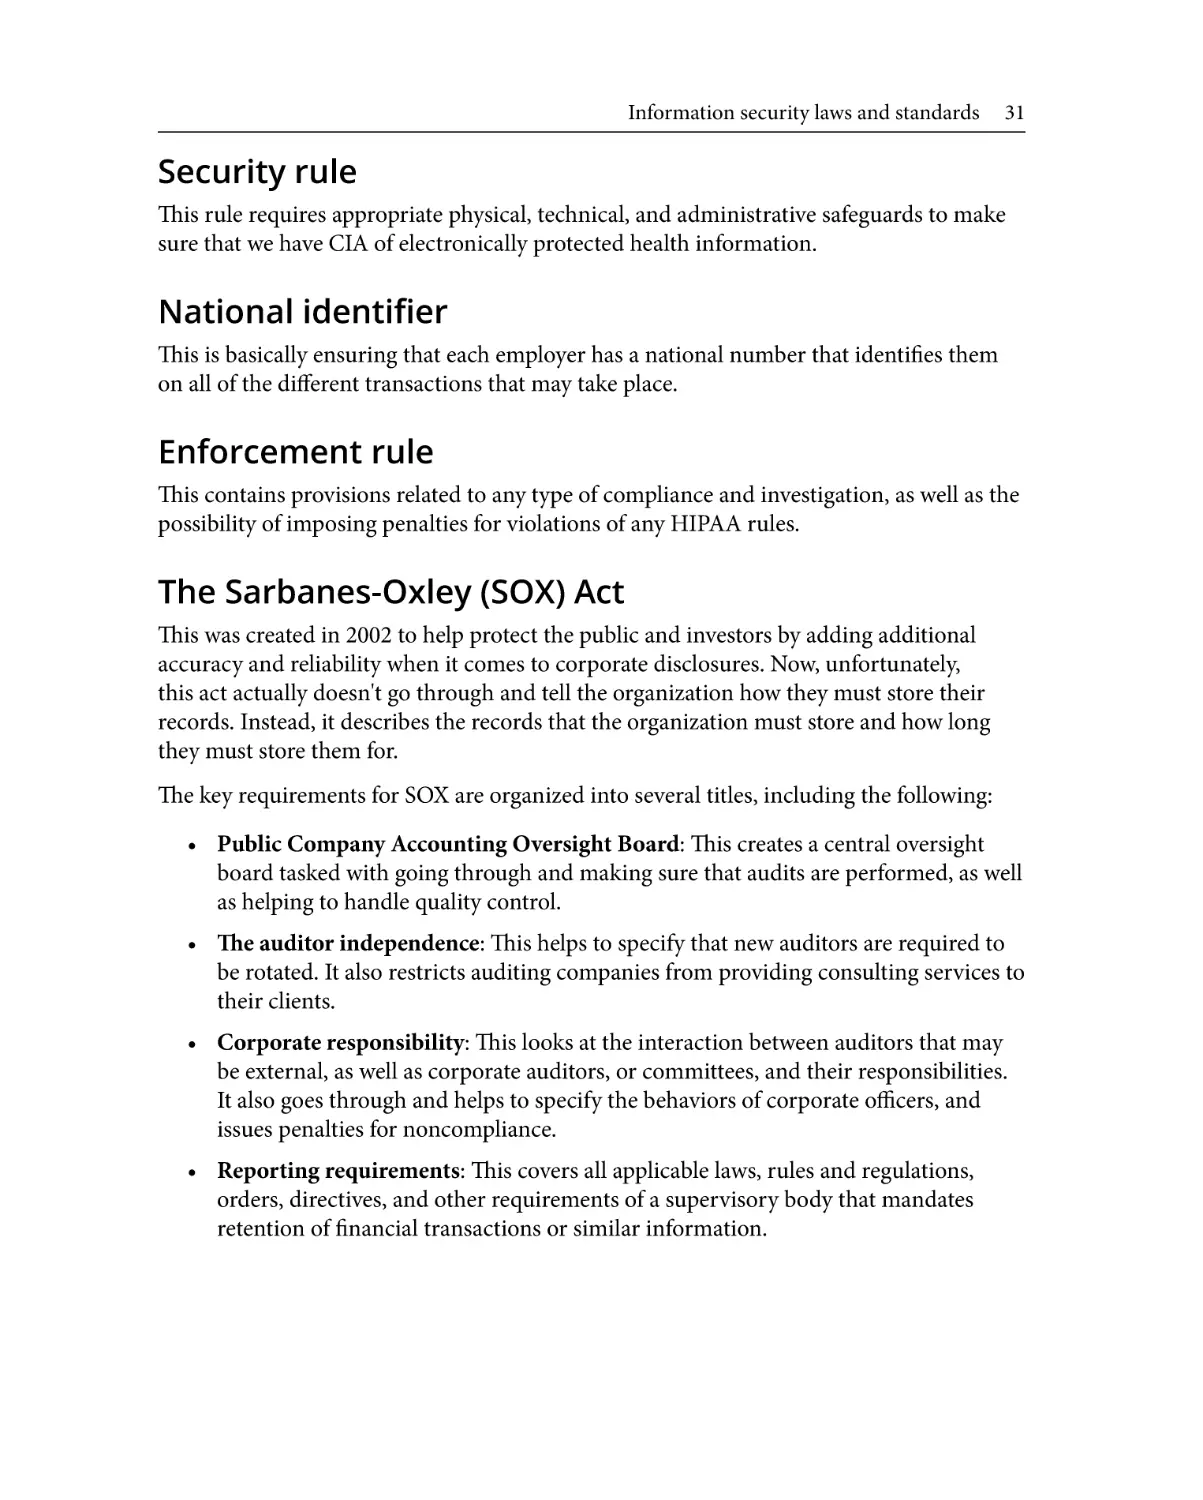 Security rule
National identifier
Enforcement rule
The Sarbanes-Oxley (SOX) Act